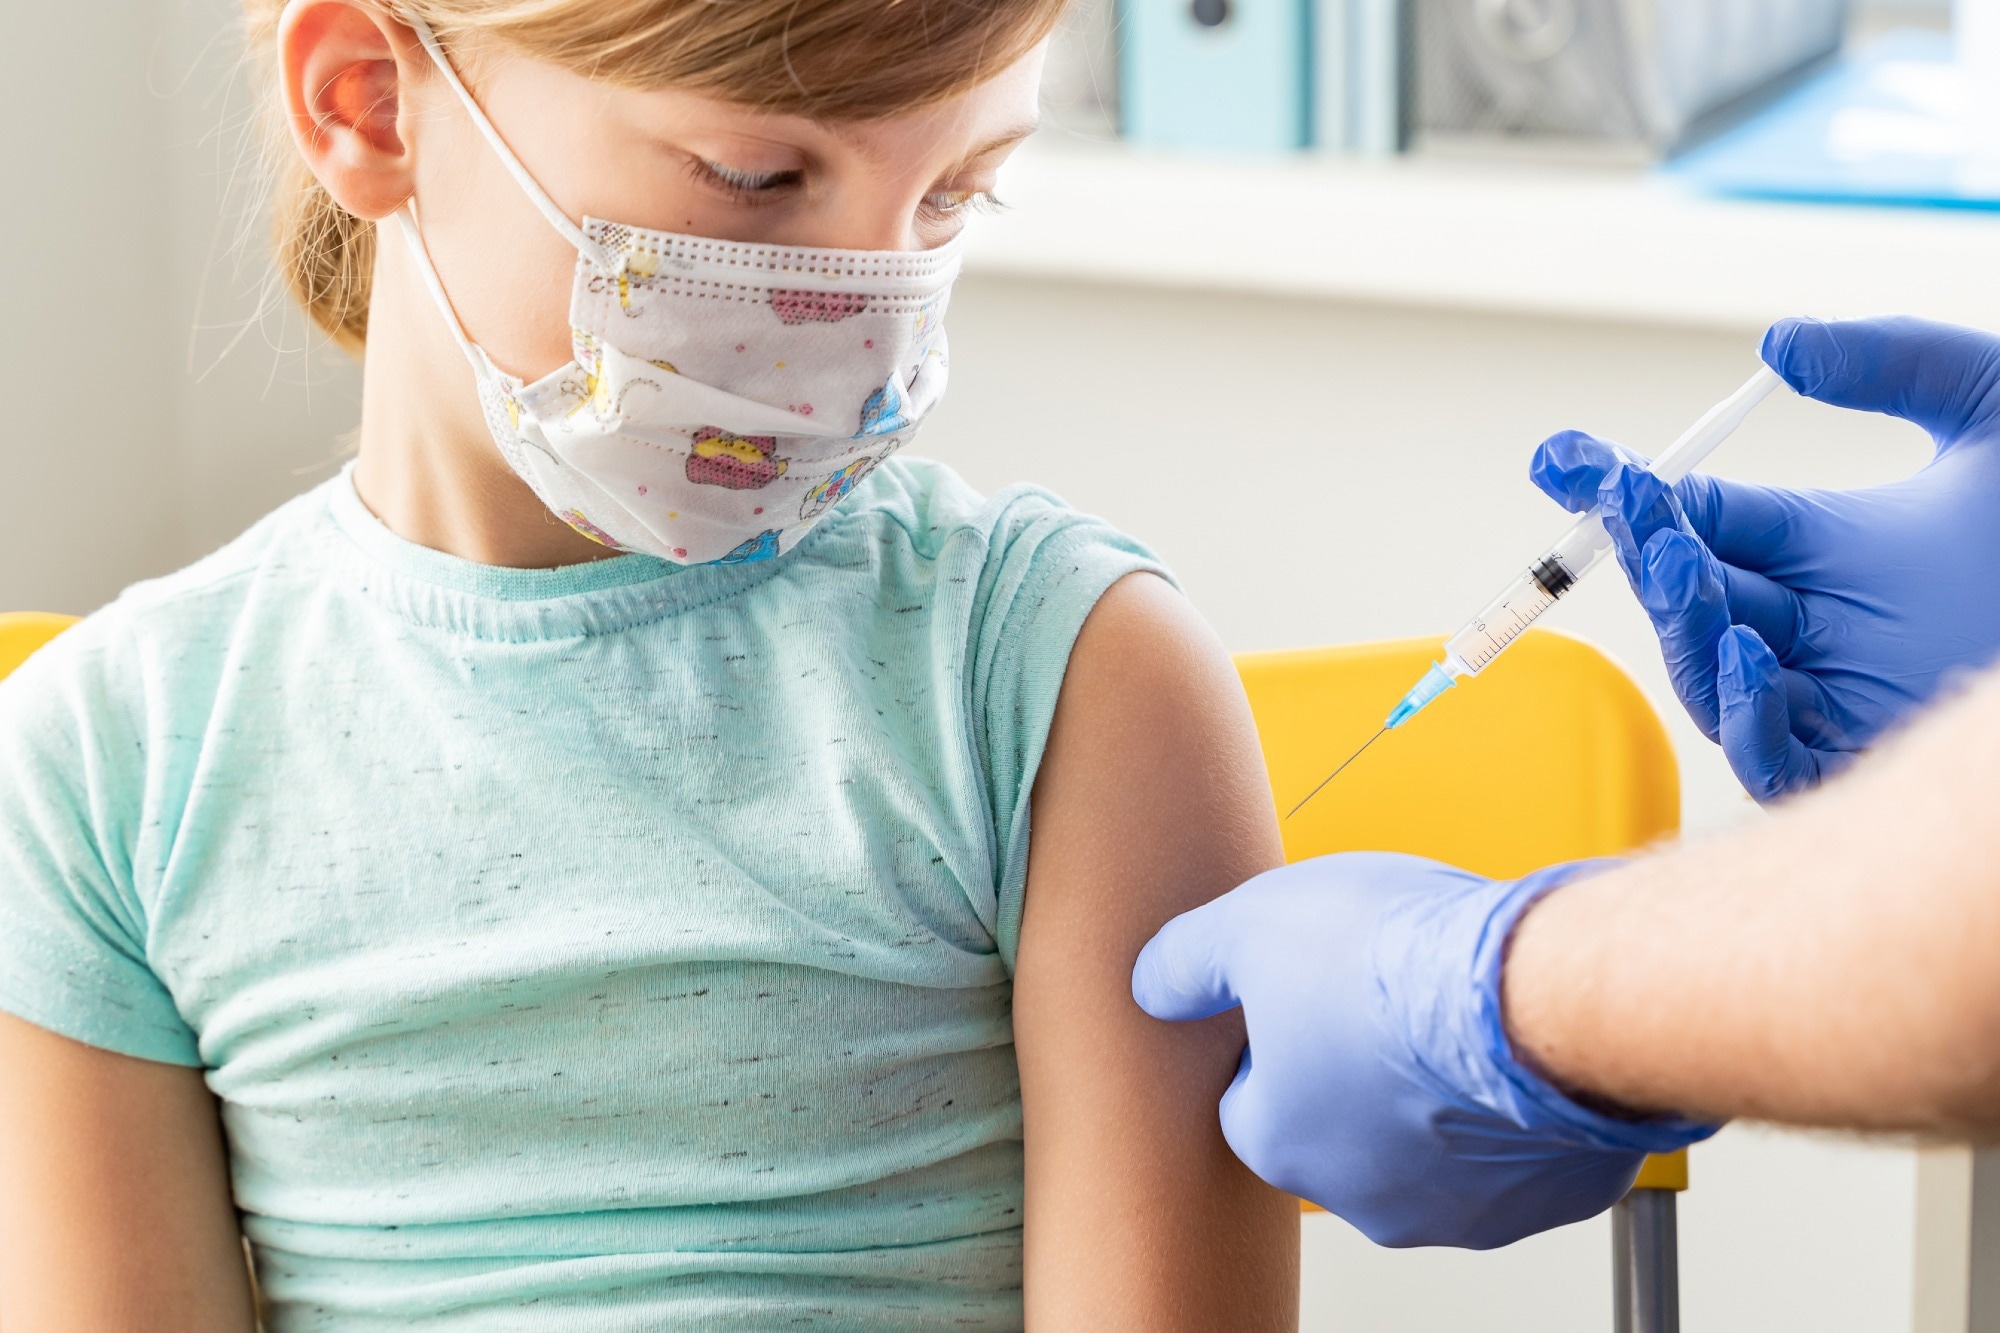 Study: BNT162b2 Vaccine Effectiveness against Omicron in Children 5 to 11 Years of Age. Image Credit: Ira Lichi / Shutterstock